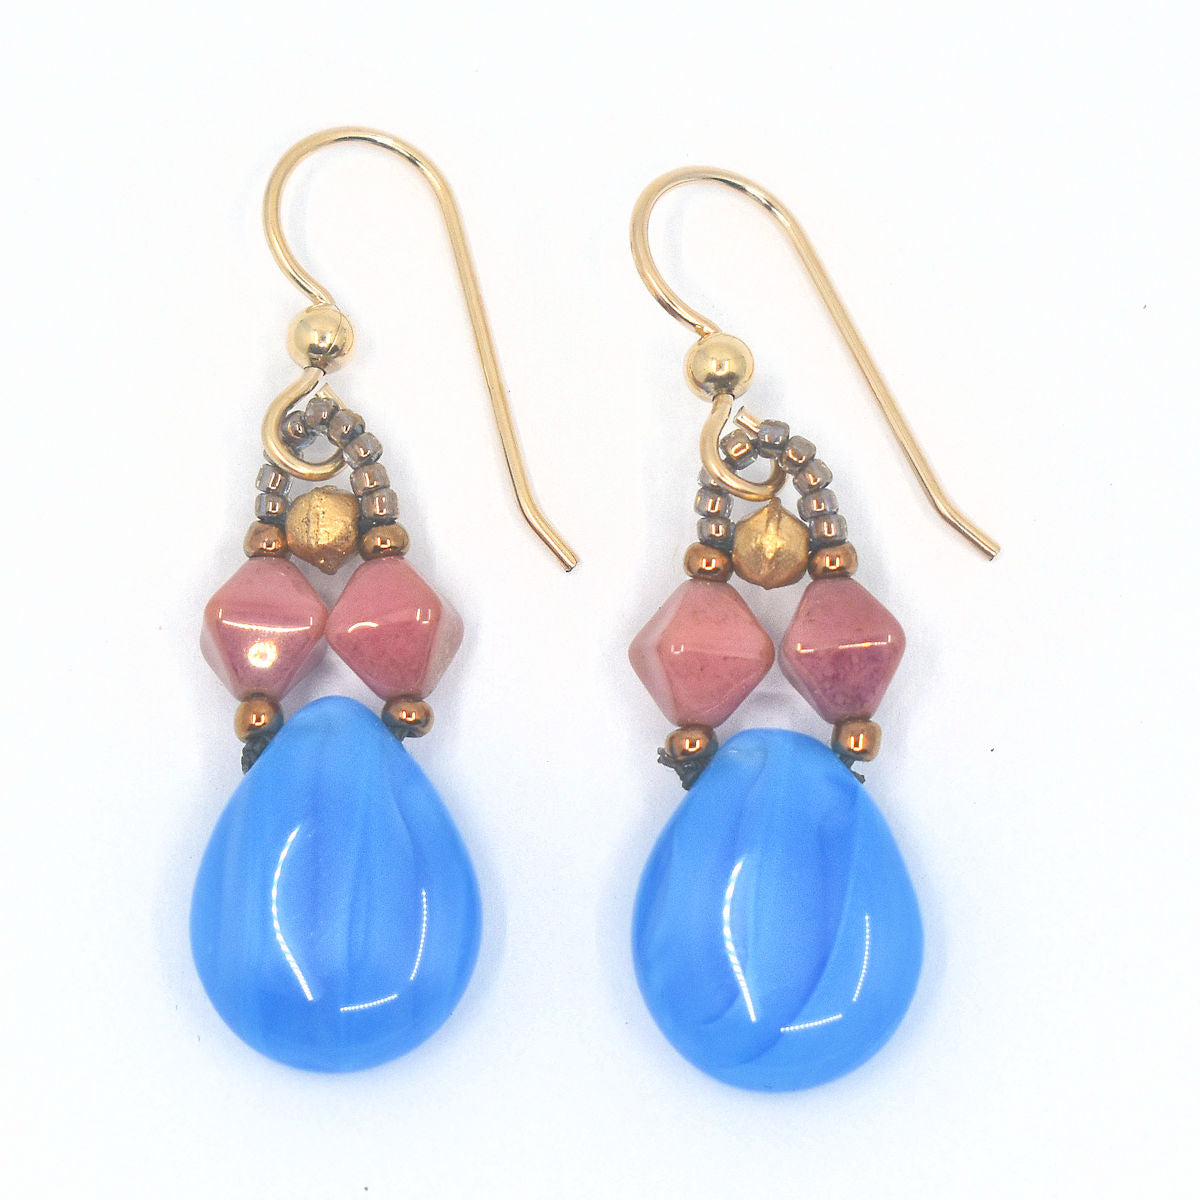 A pair of pink and blue earrings laying on a white background. The earrings are formed from large clear/blue striped glass suspended from light blue/clear swirl teardrops suspended from two parallel dusty pink double pyramids.